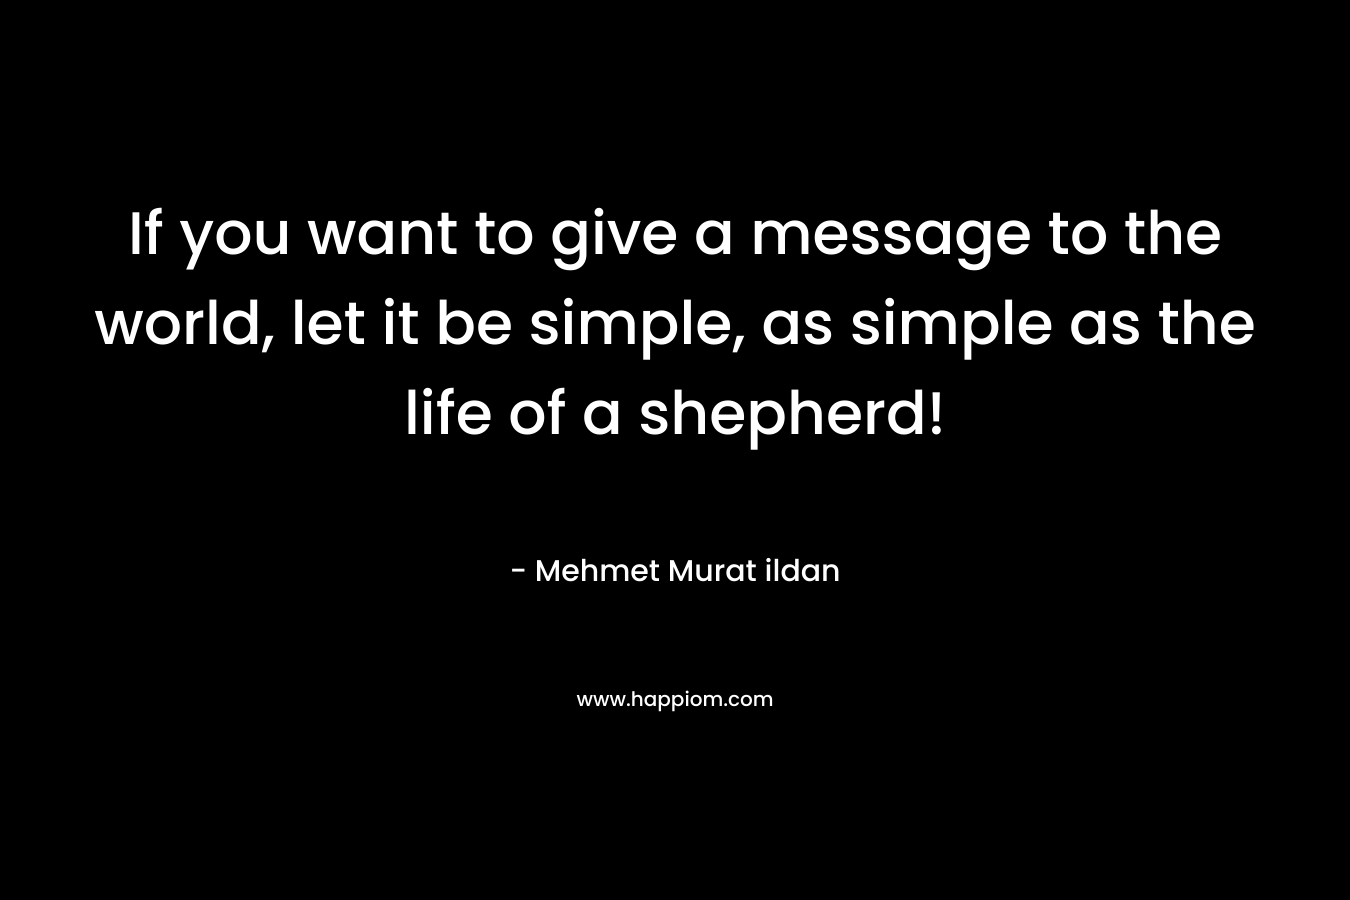 If you want to give a message to the world, let it be simple, as simple as the life of a shepherd!